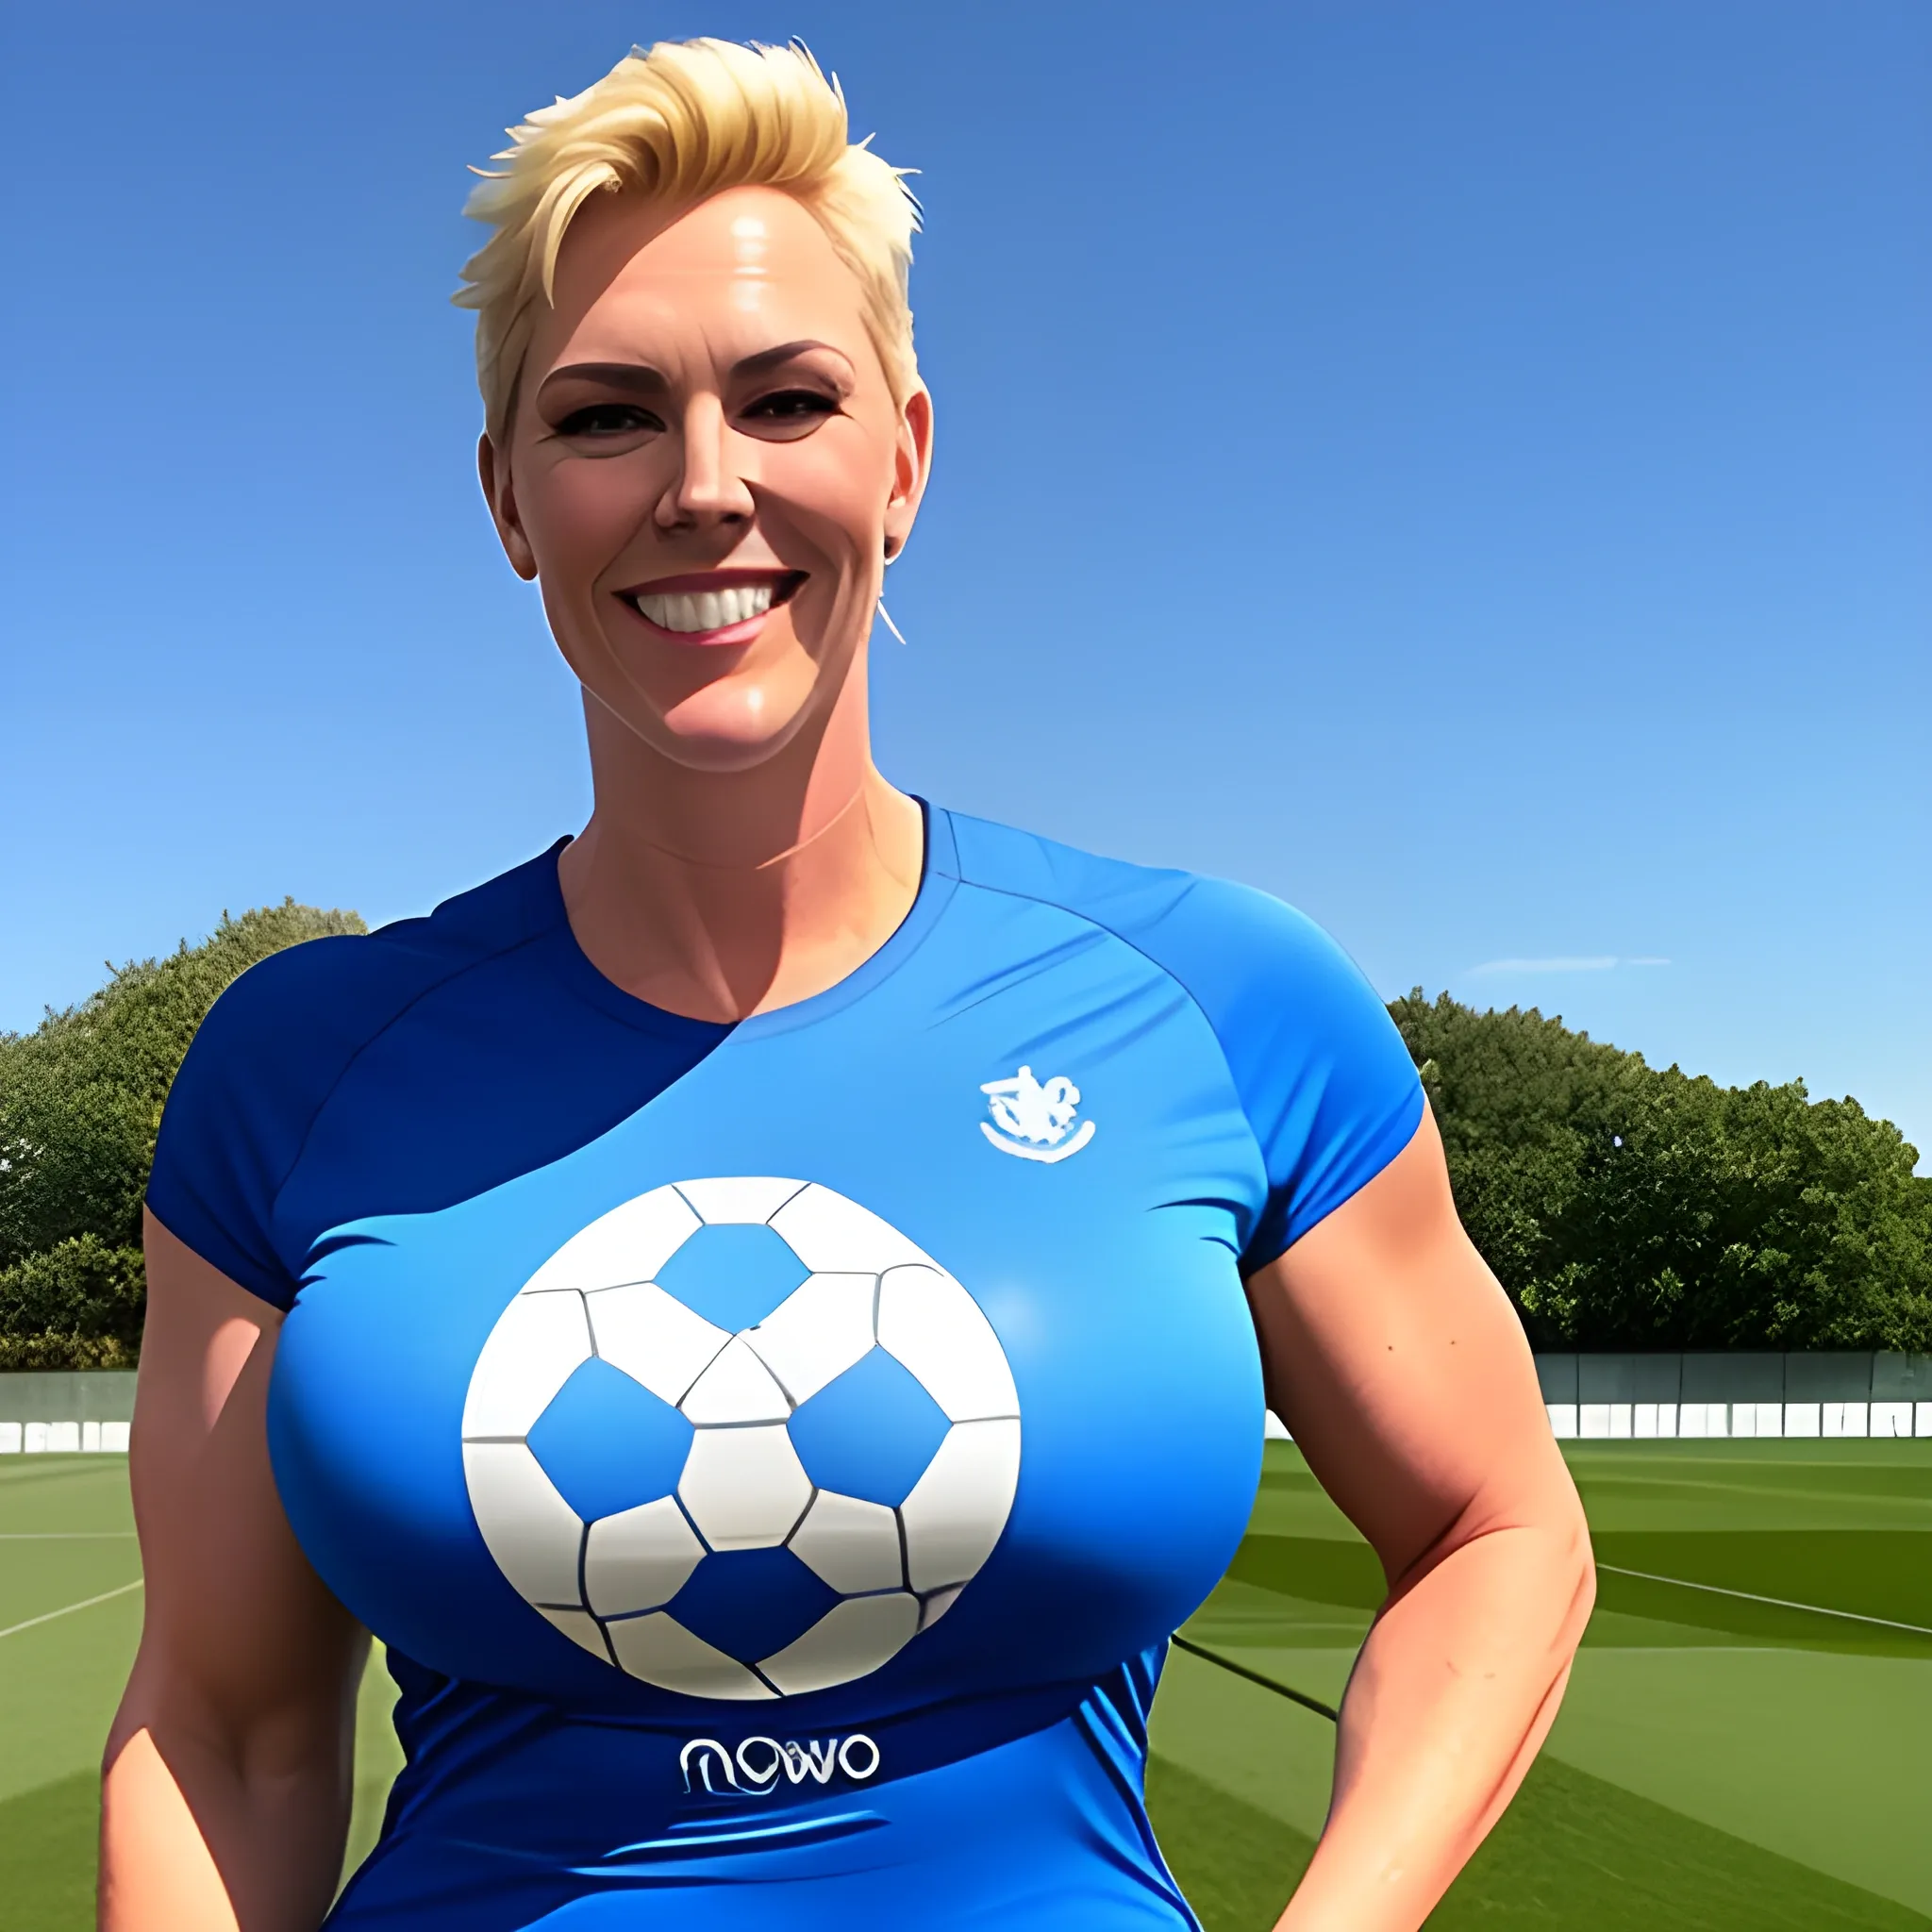 8 ft tall muscular extra large massive gently smiling beautiful young blonde girl with short blonde hair, in T-shirt and shorts, standing on training ground under blue sky 